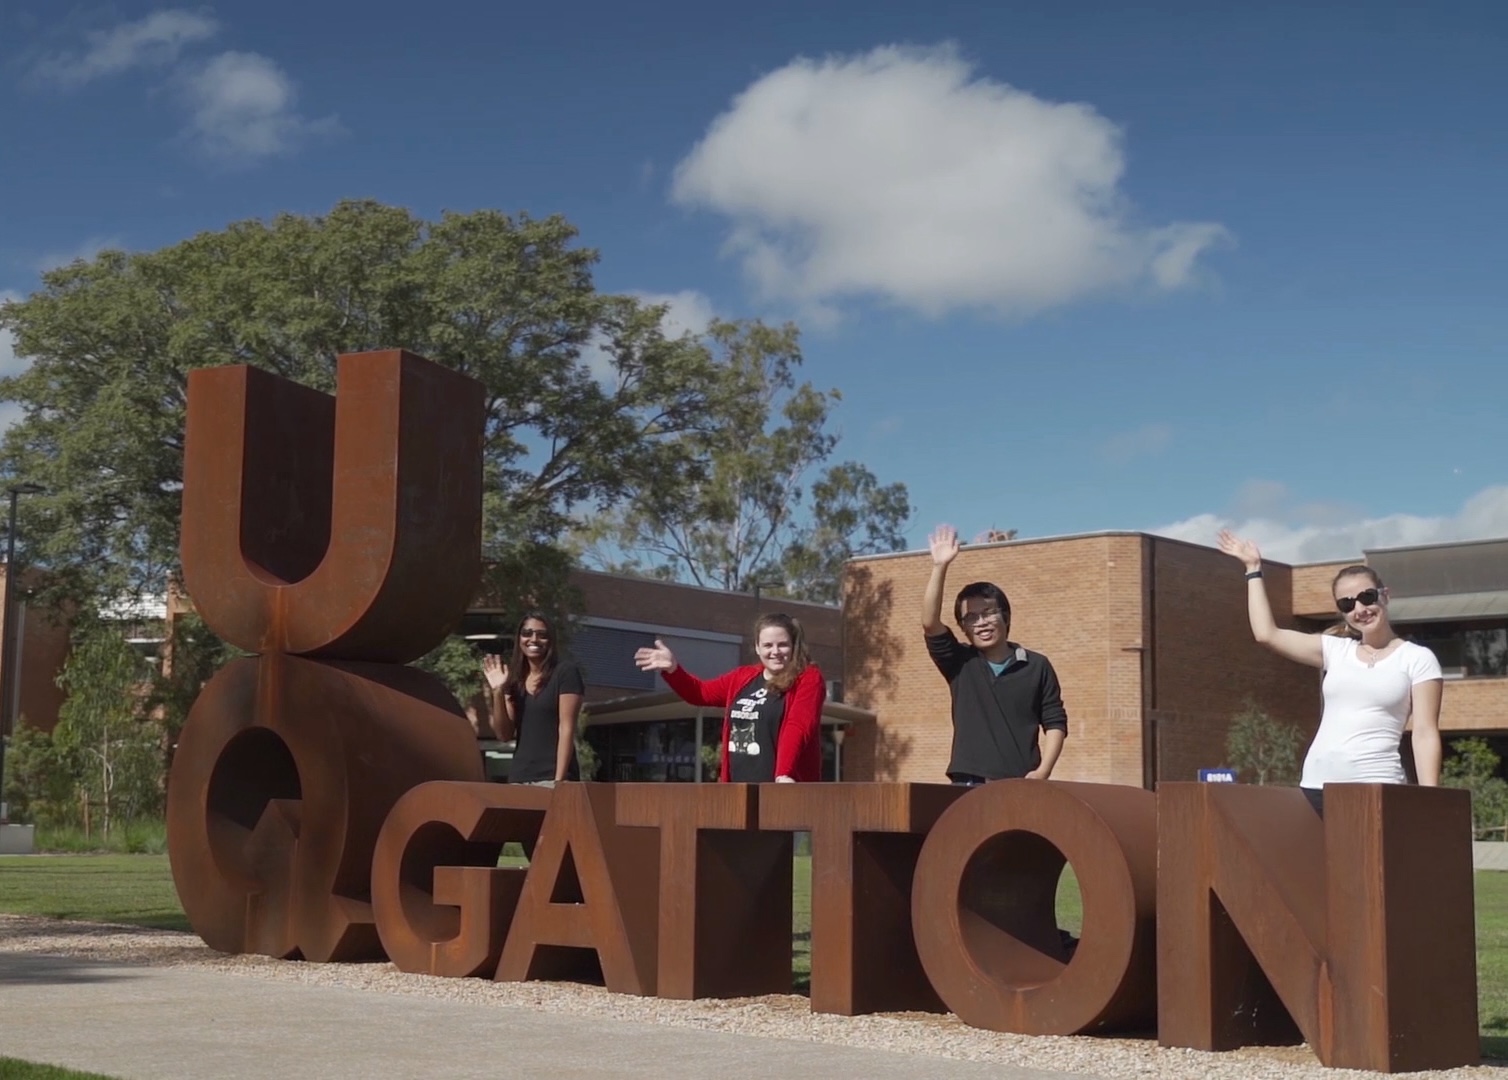 students waving in front of UQ Gatton sign